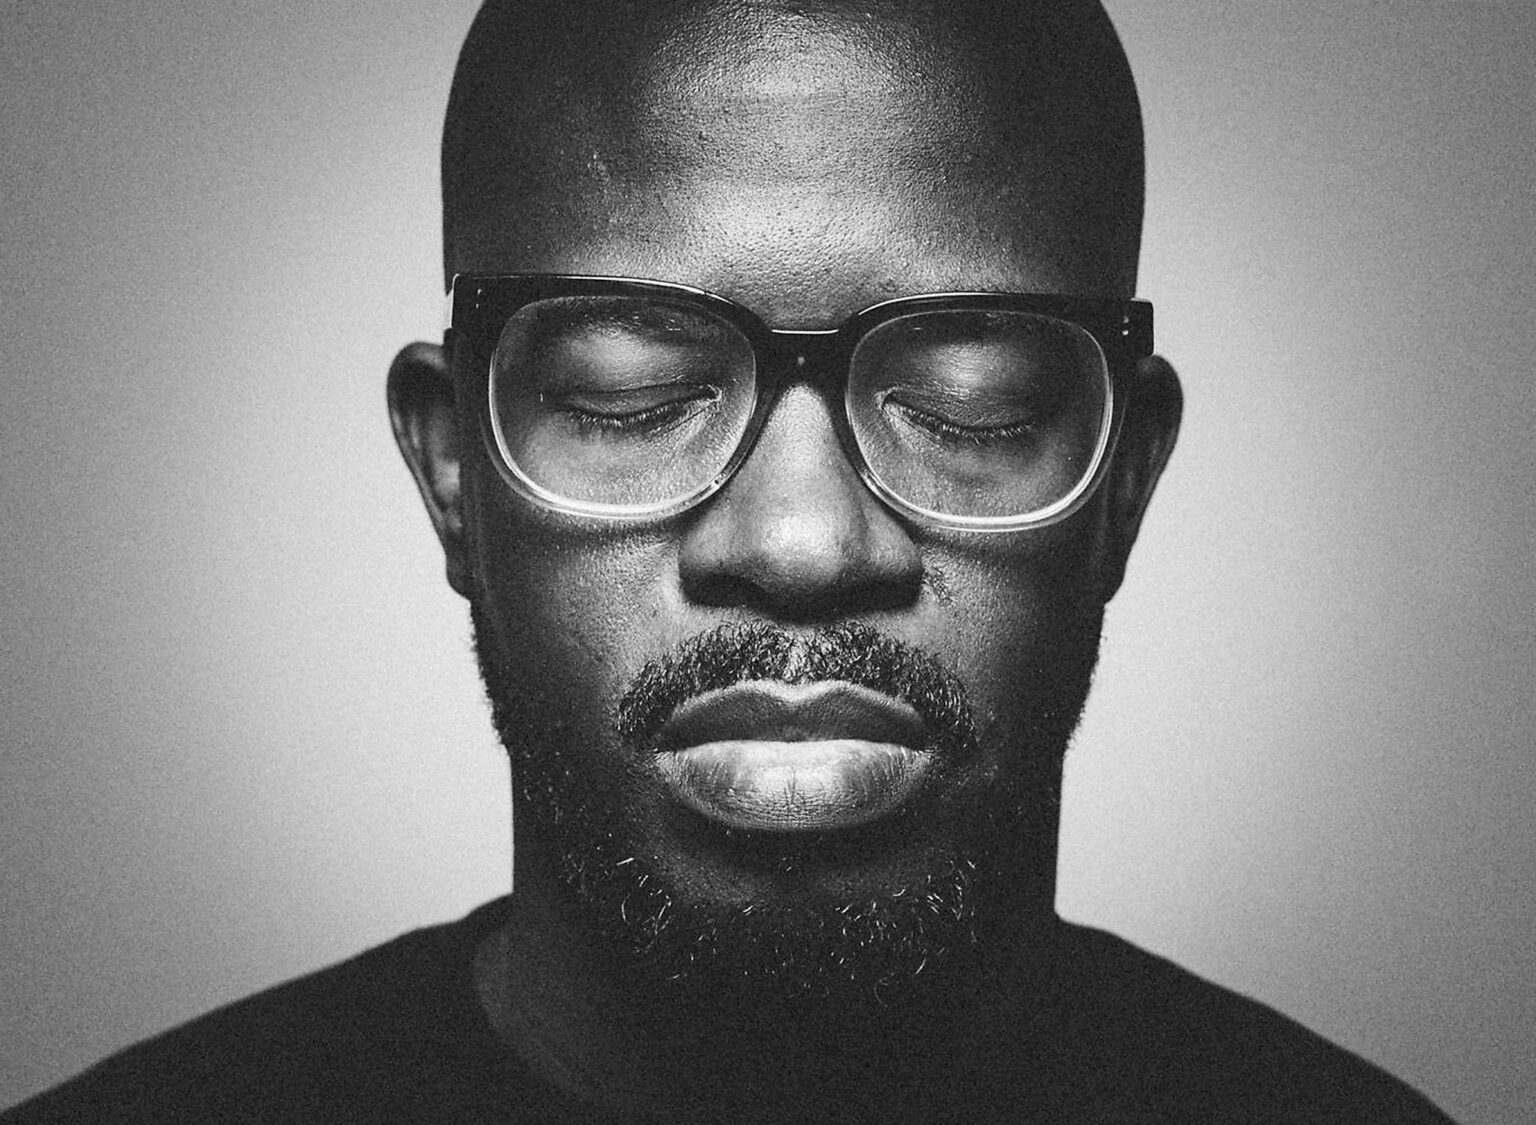 Black Coffee live in London Saturday 20th November at the Drumsheds